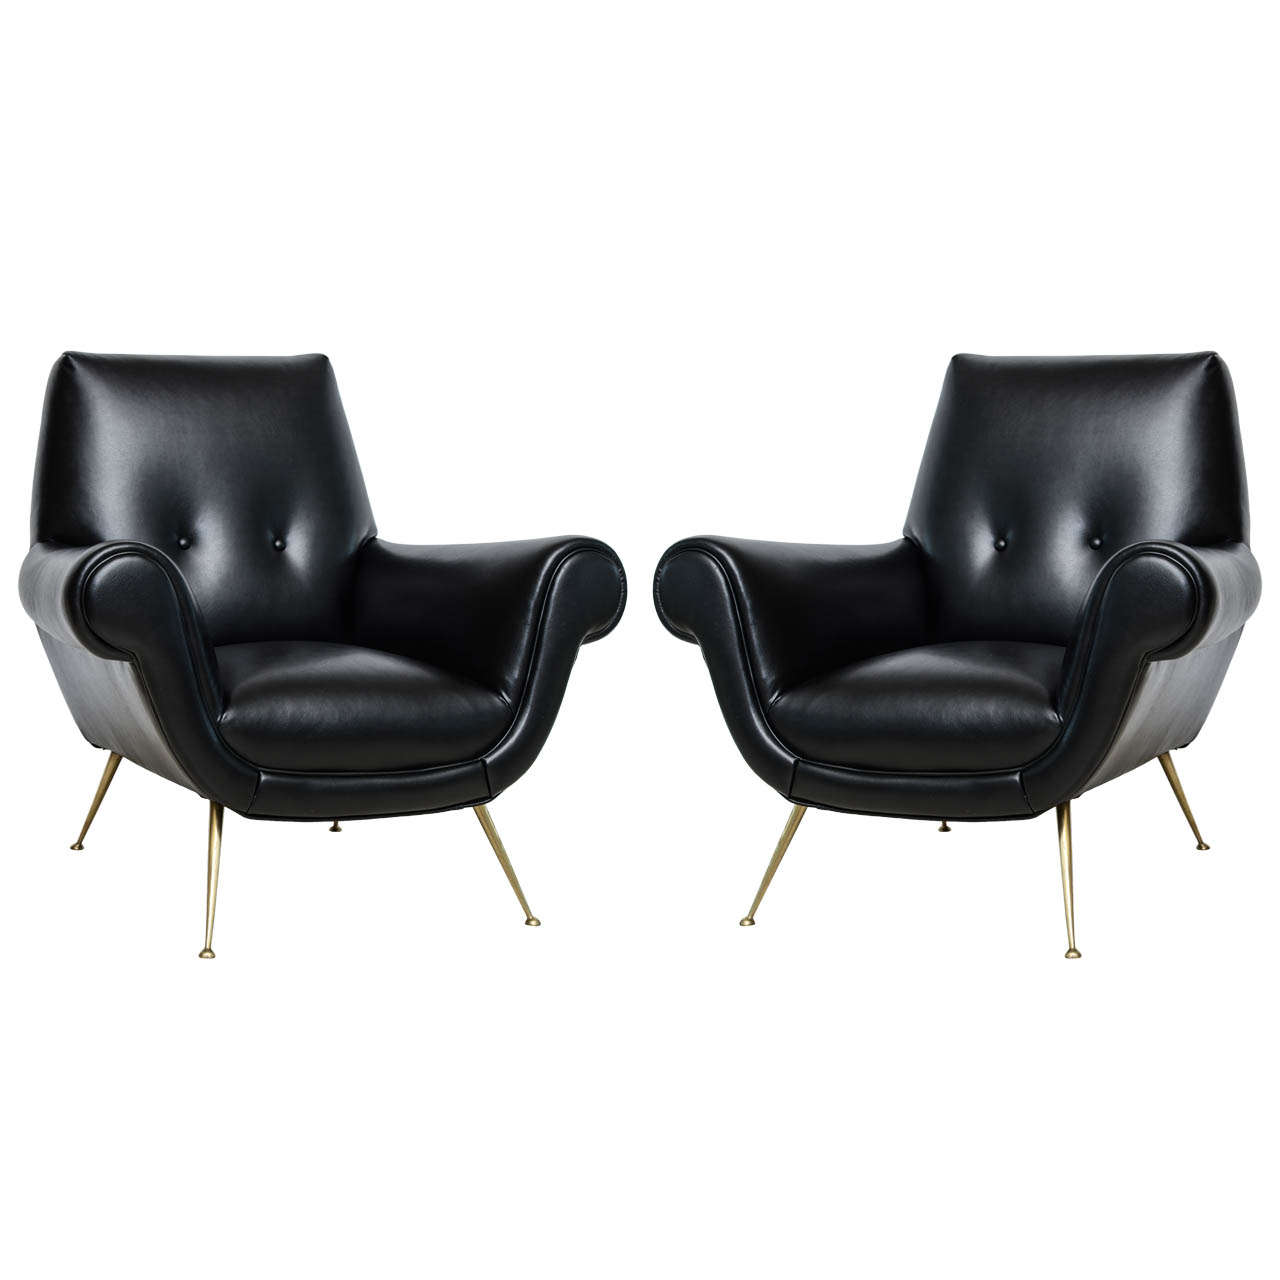 Pair of Italian Modern Leather and Brass Lounge Chairs, Minotti